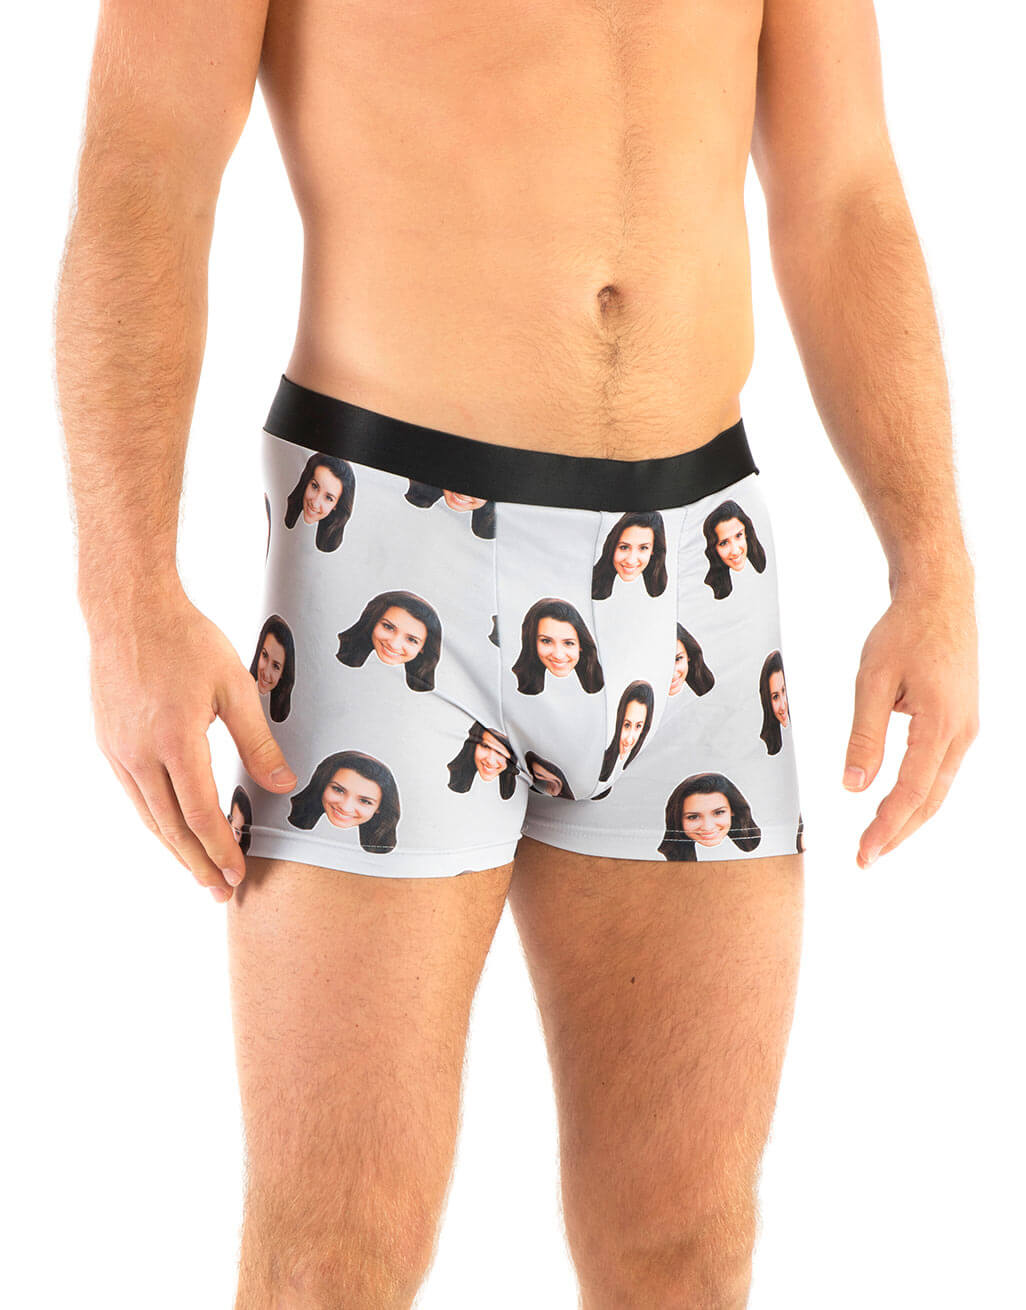 Customized Boxers for Men with Photo - Personalized Underwear for